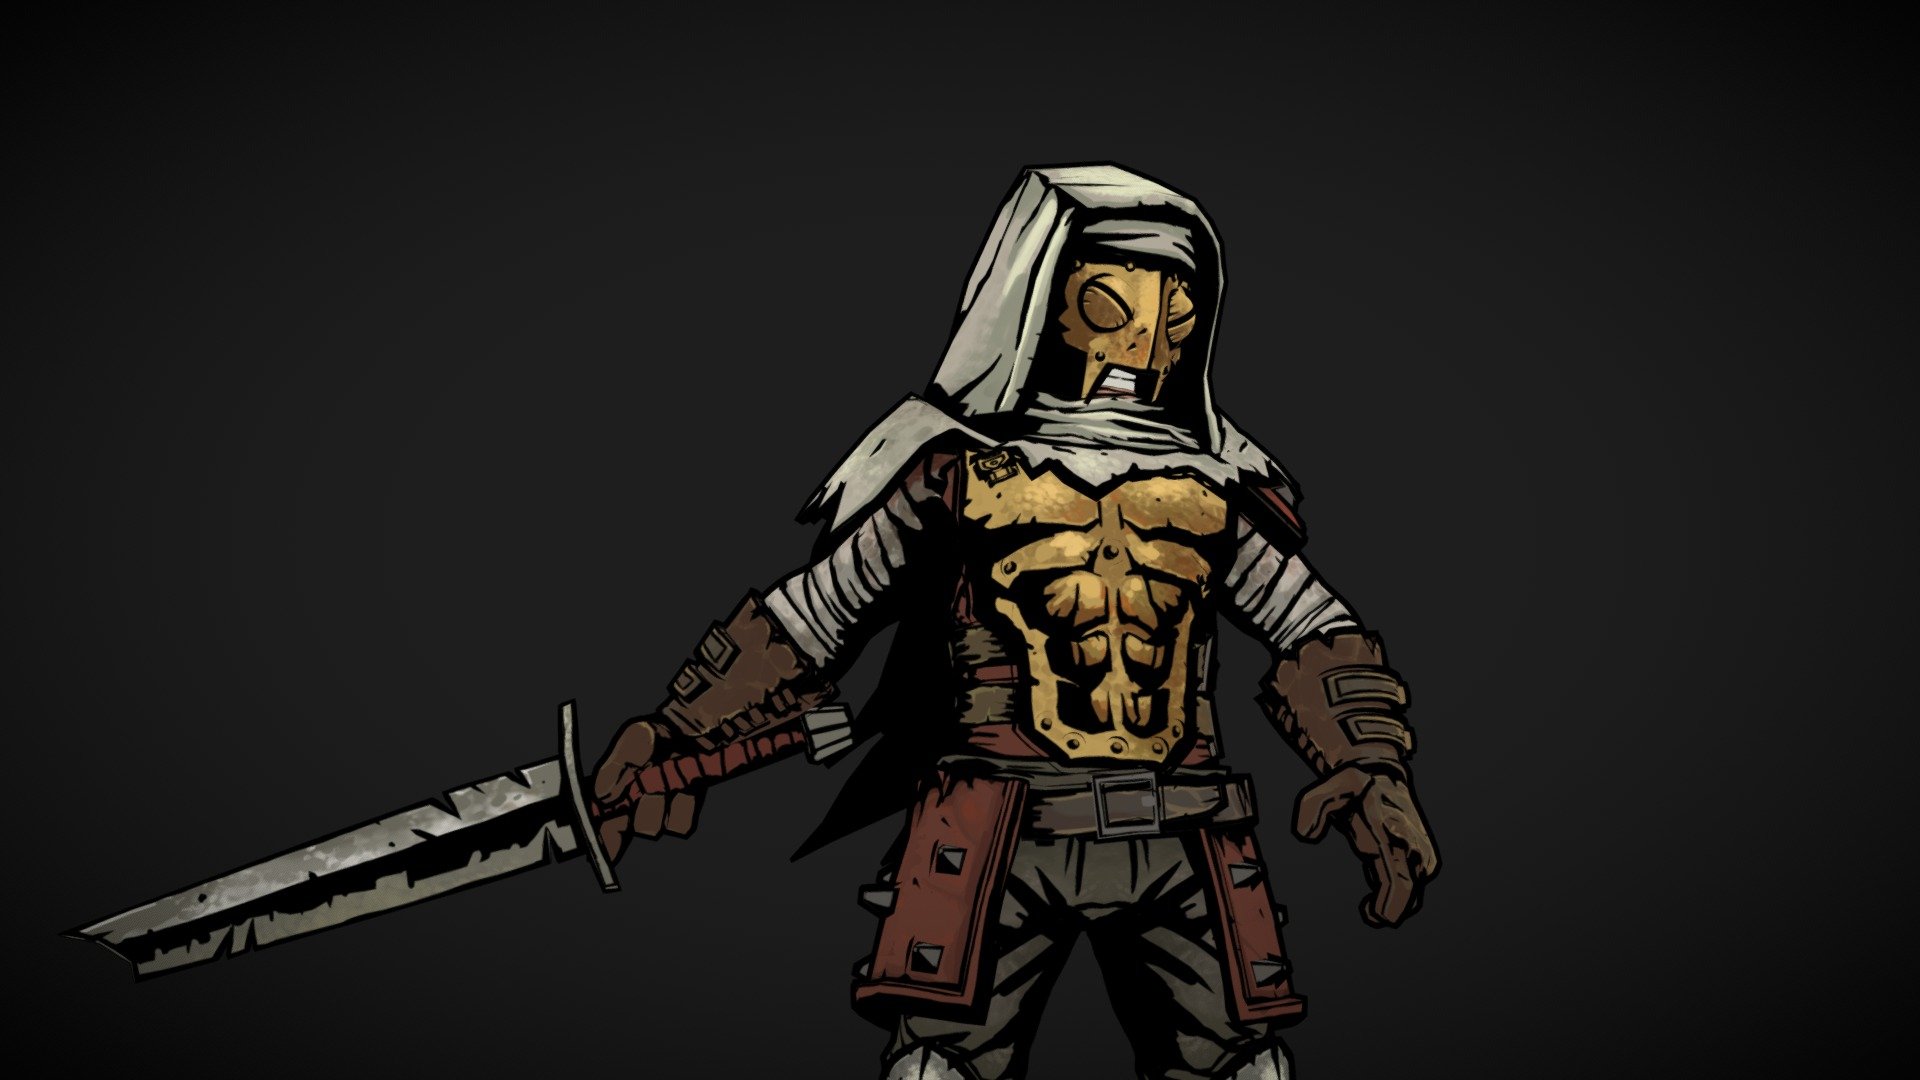 Hey there, just some Darkest Dungeon fanart for fun :)
Seeing the trailer for Darkest Dungeon 2 was super exciting (the first game was a lot of fun!!!), but I noticed it was missing the coolest character, the Leper!!!
All modeled and textured inside blender :) - Chatwood, The Forgotten - 3D model by rawrlungs 3d model